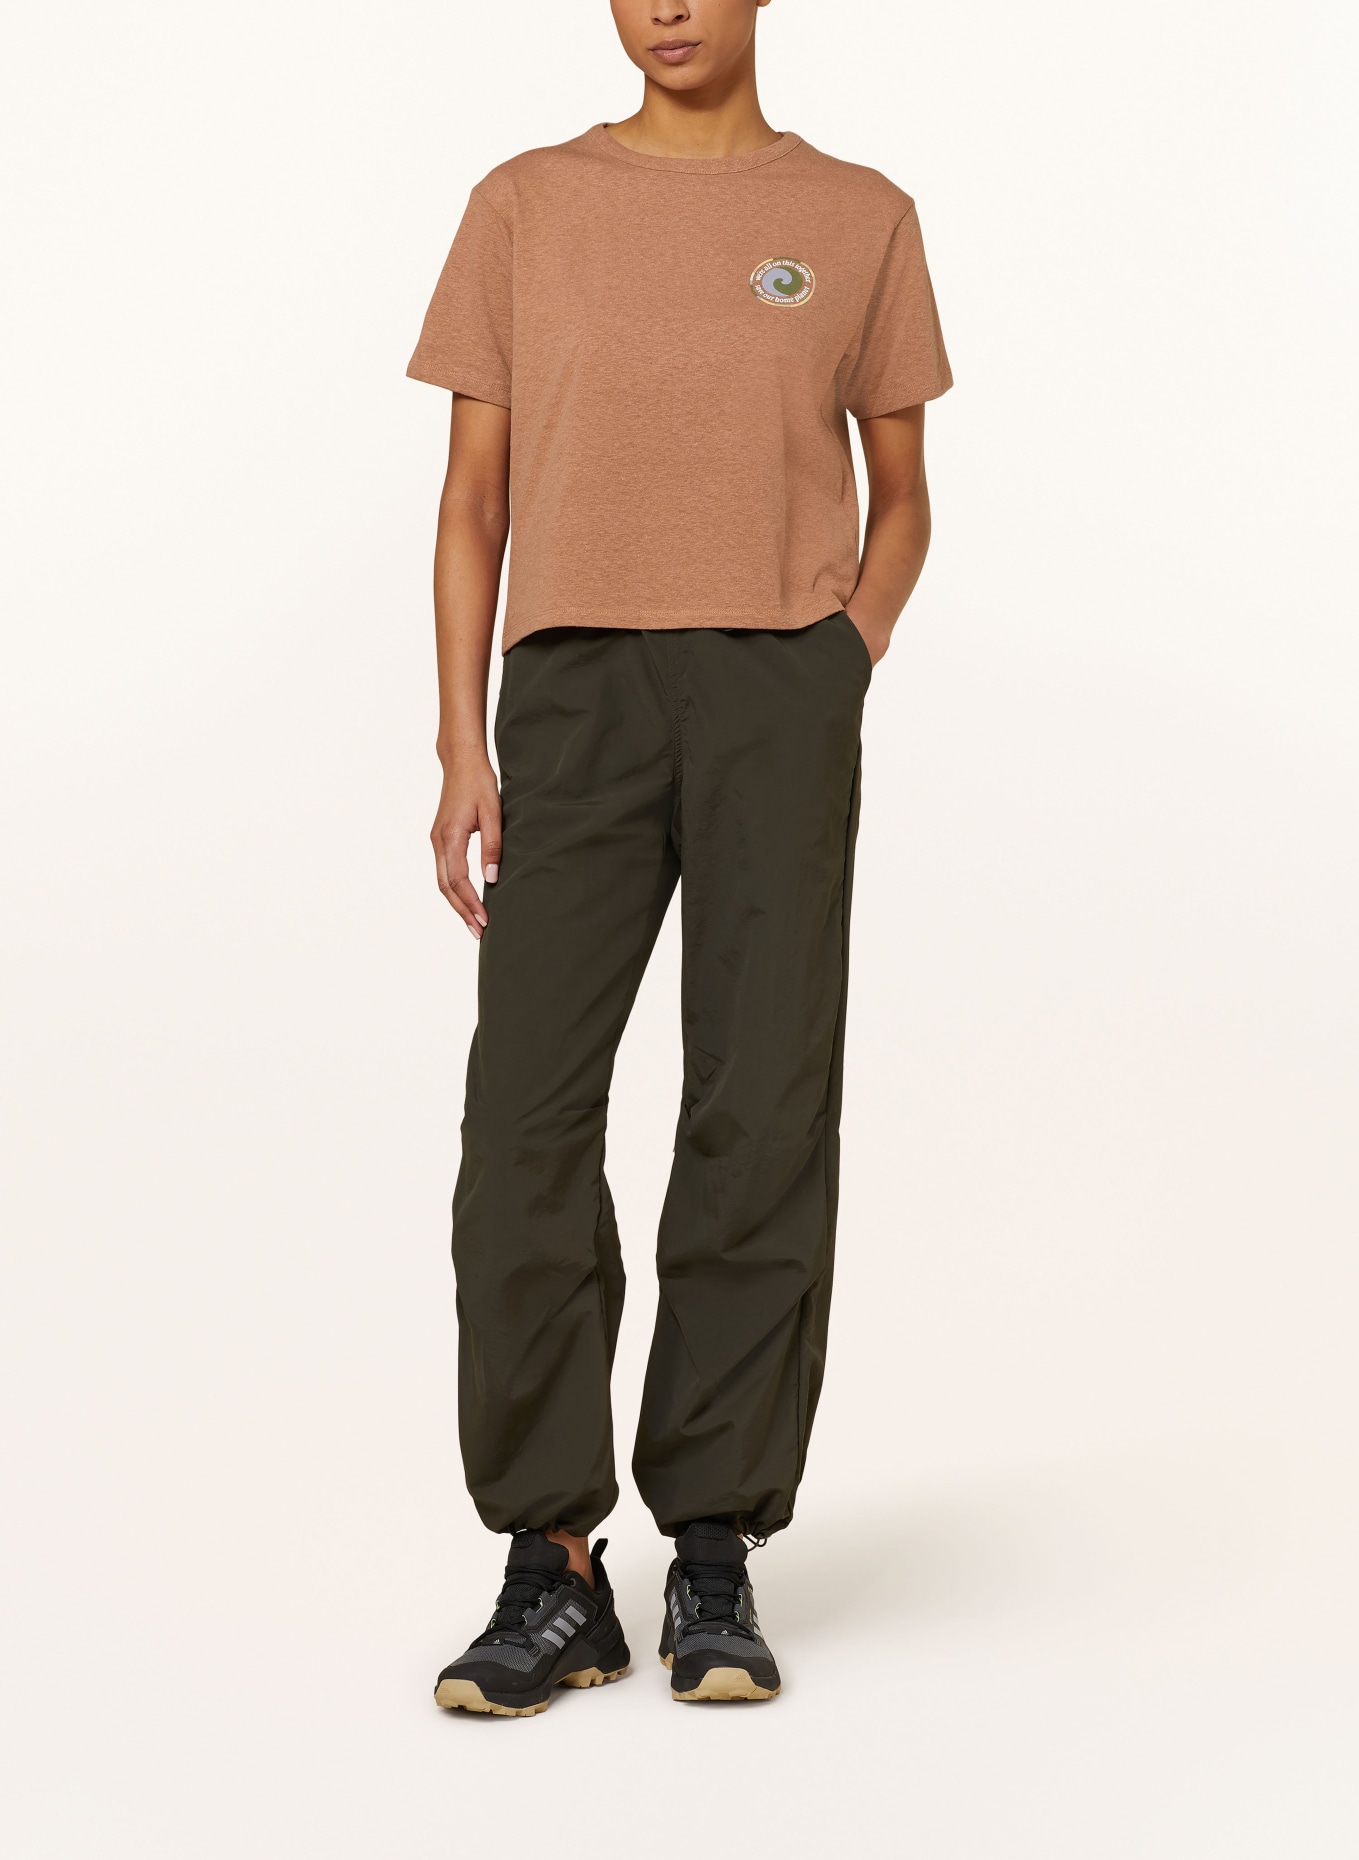 patagonia T-shirt UNITY FITZ, Color: BROWN (Image 3)